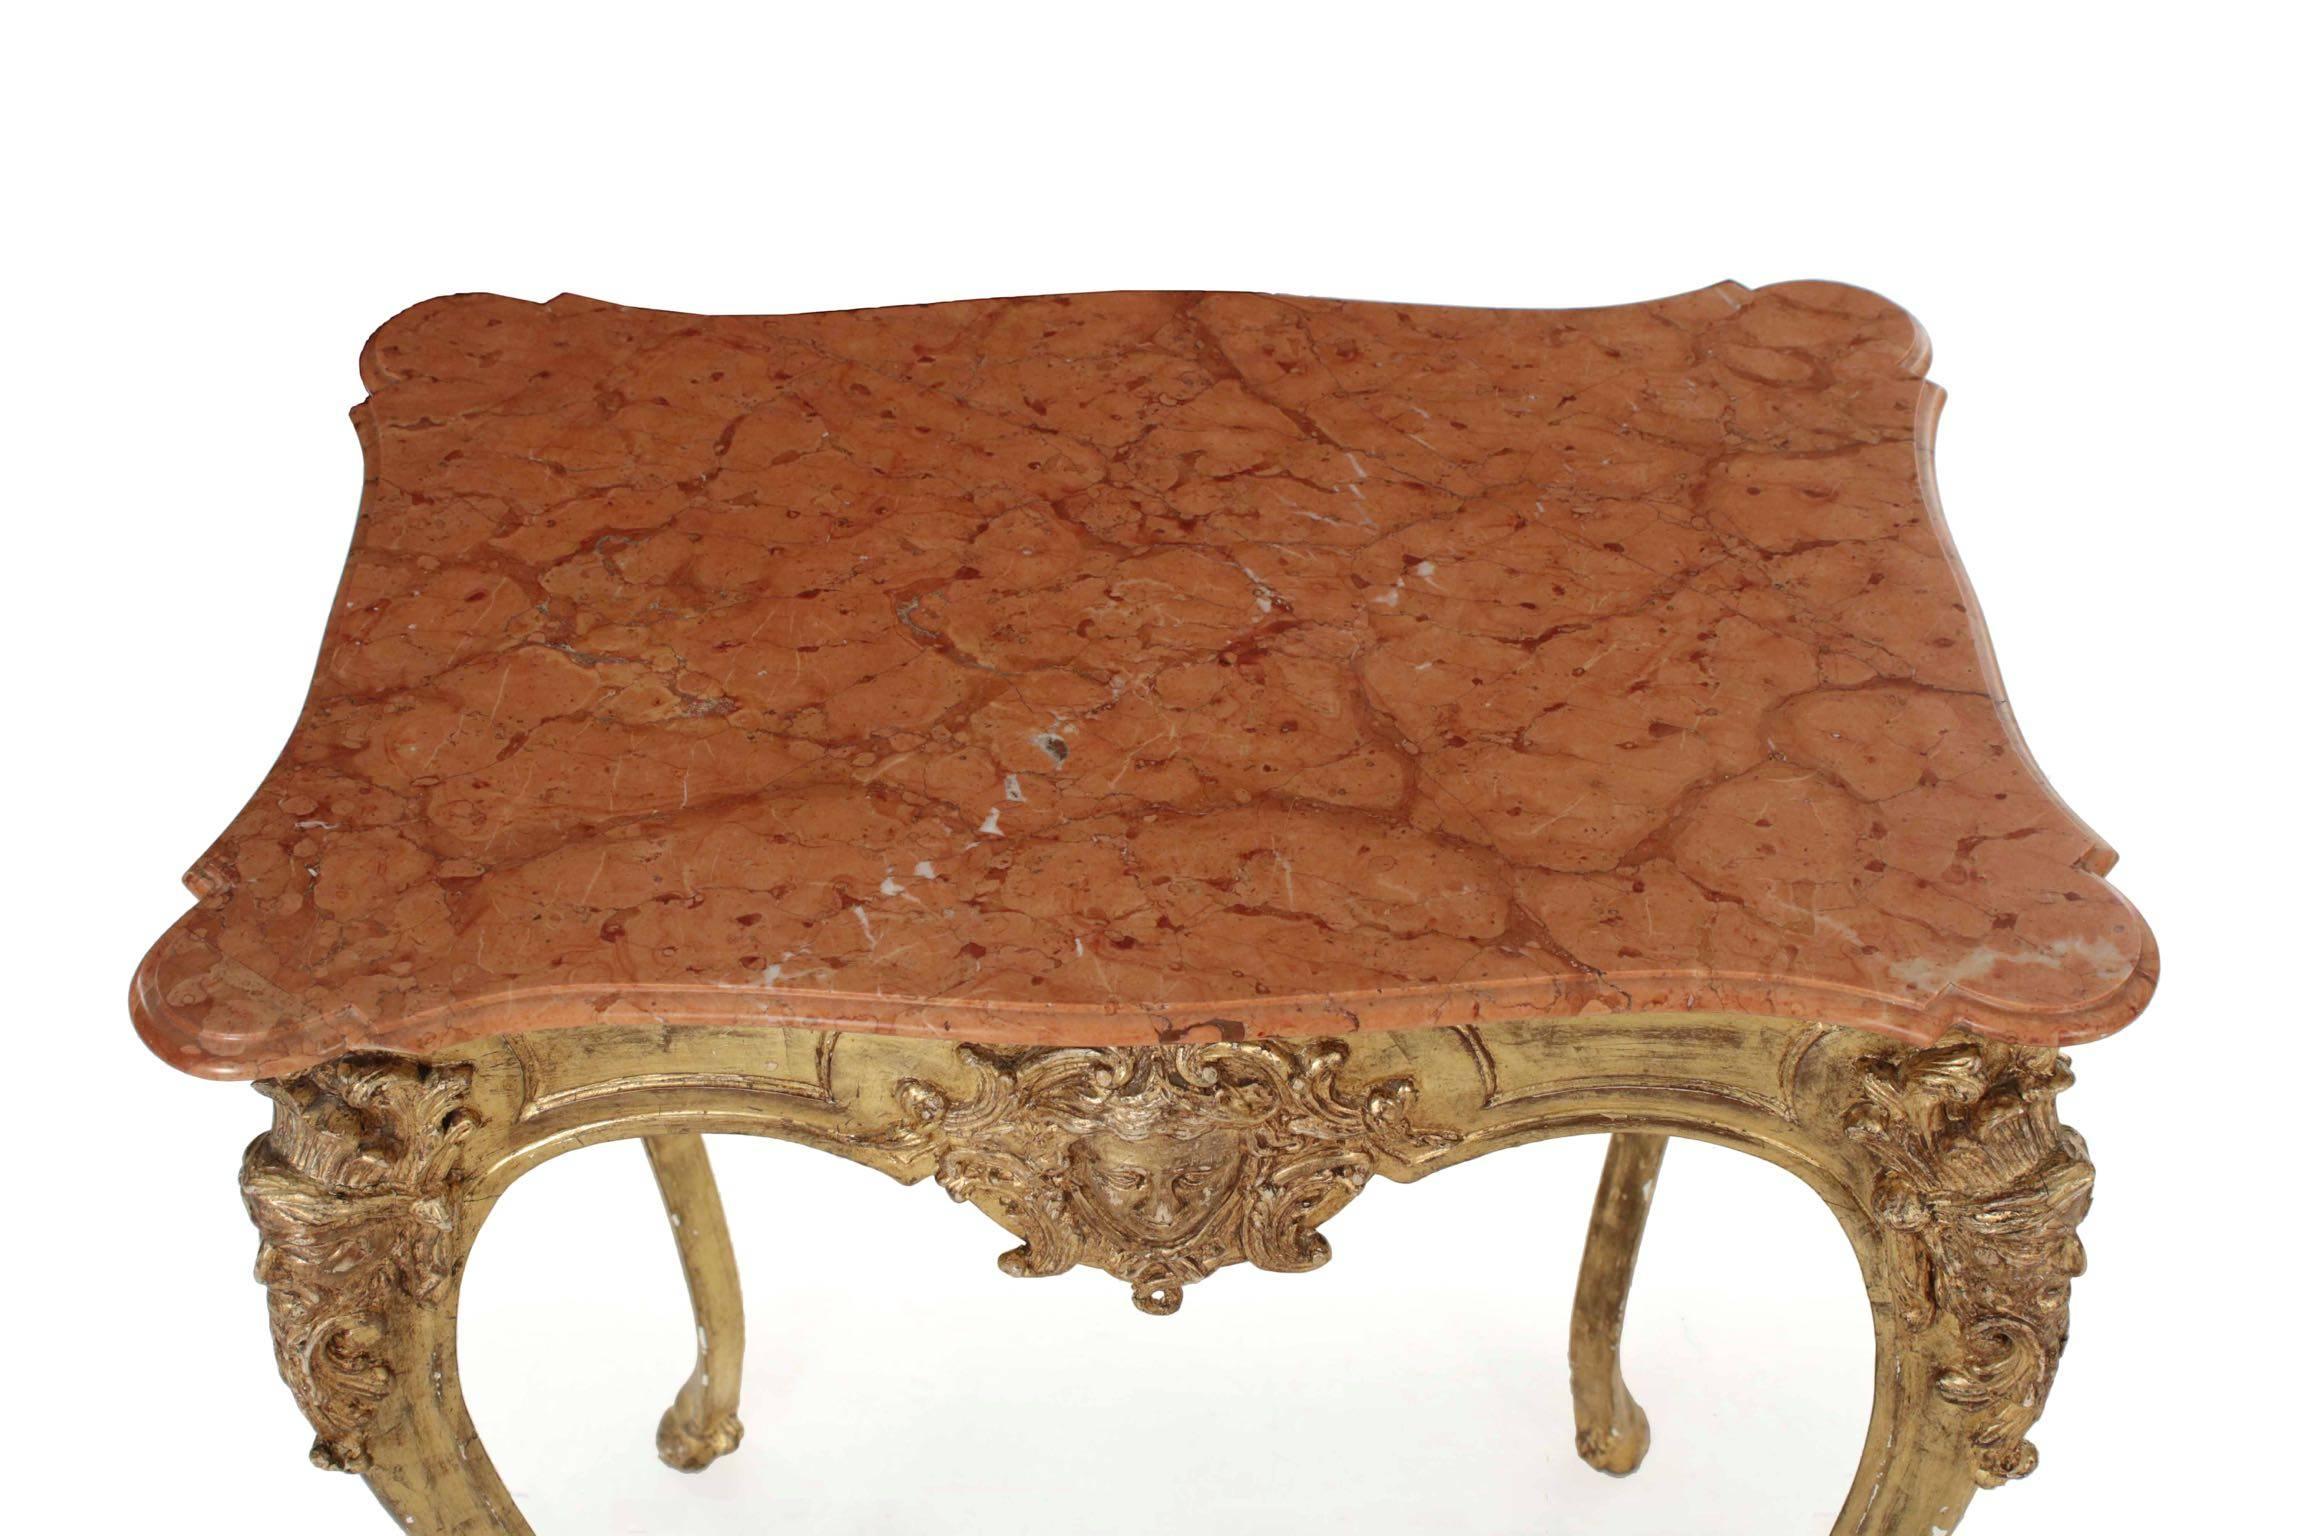 19th Century Continental Rococo Giltwood and Marble Side Table with Hooved Sabots